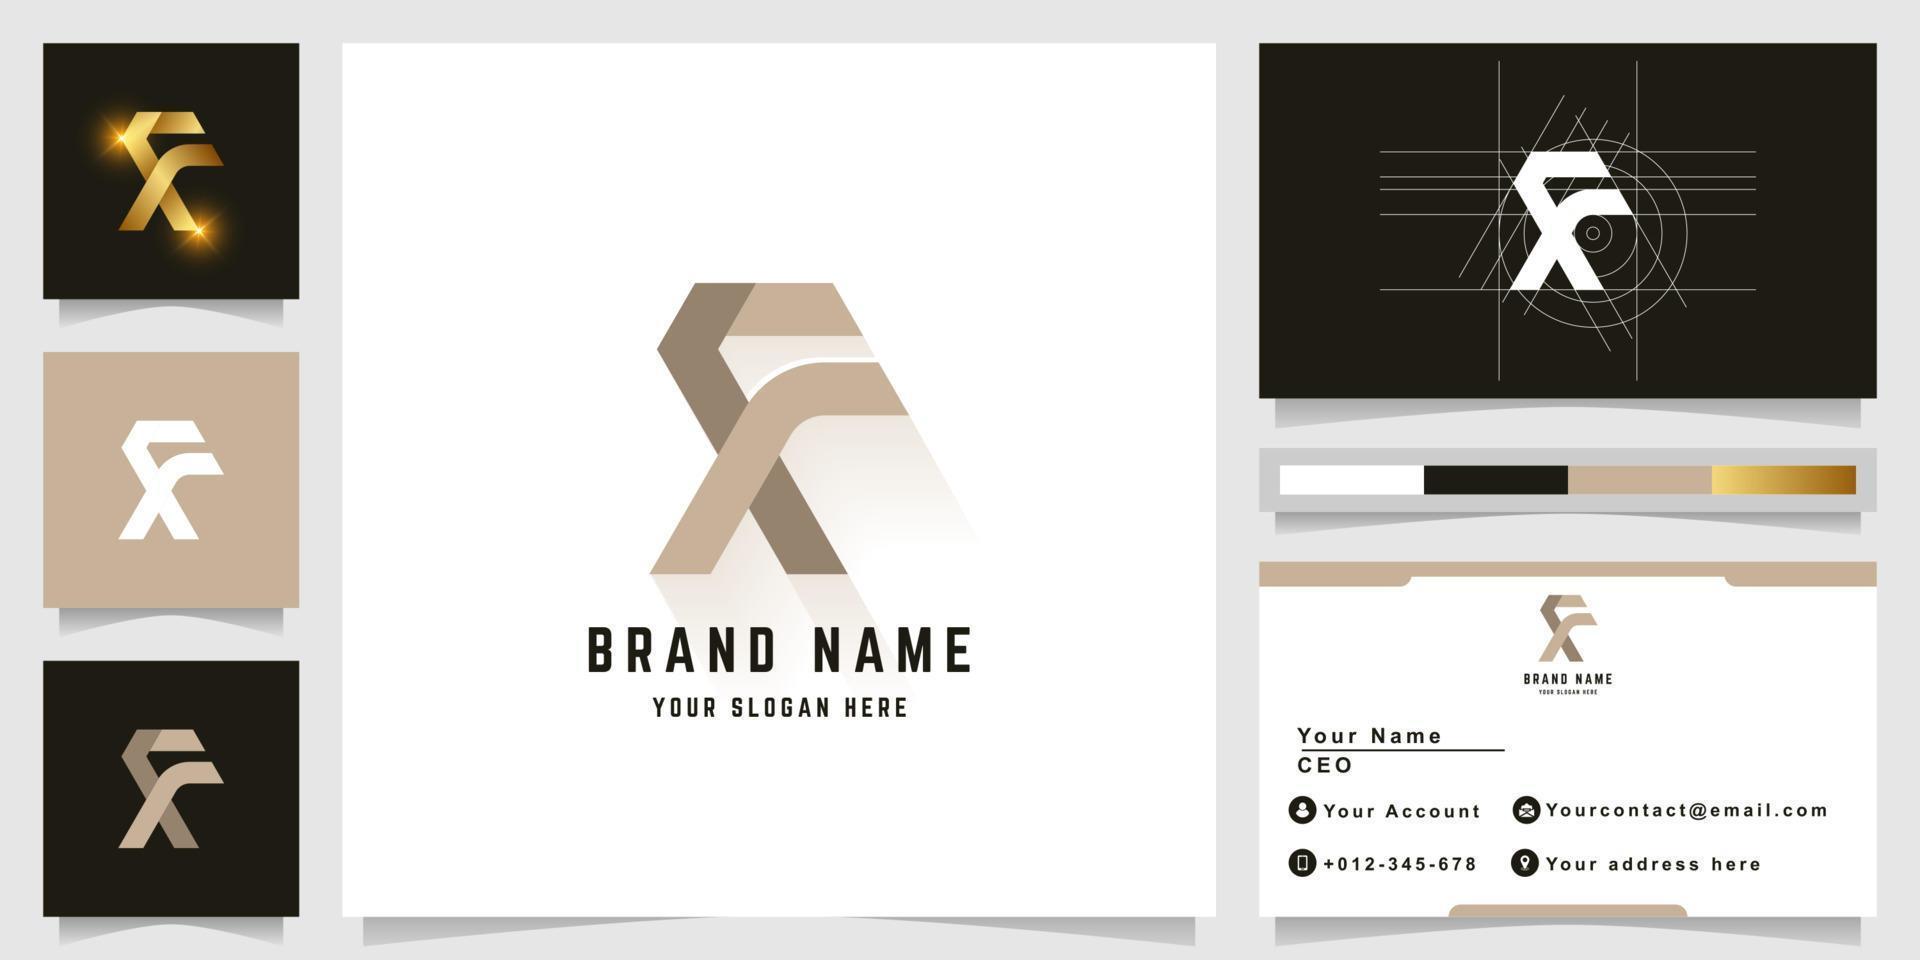 Letter XF or FX monogram logo with business card design vector